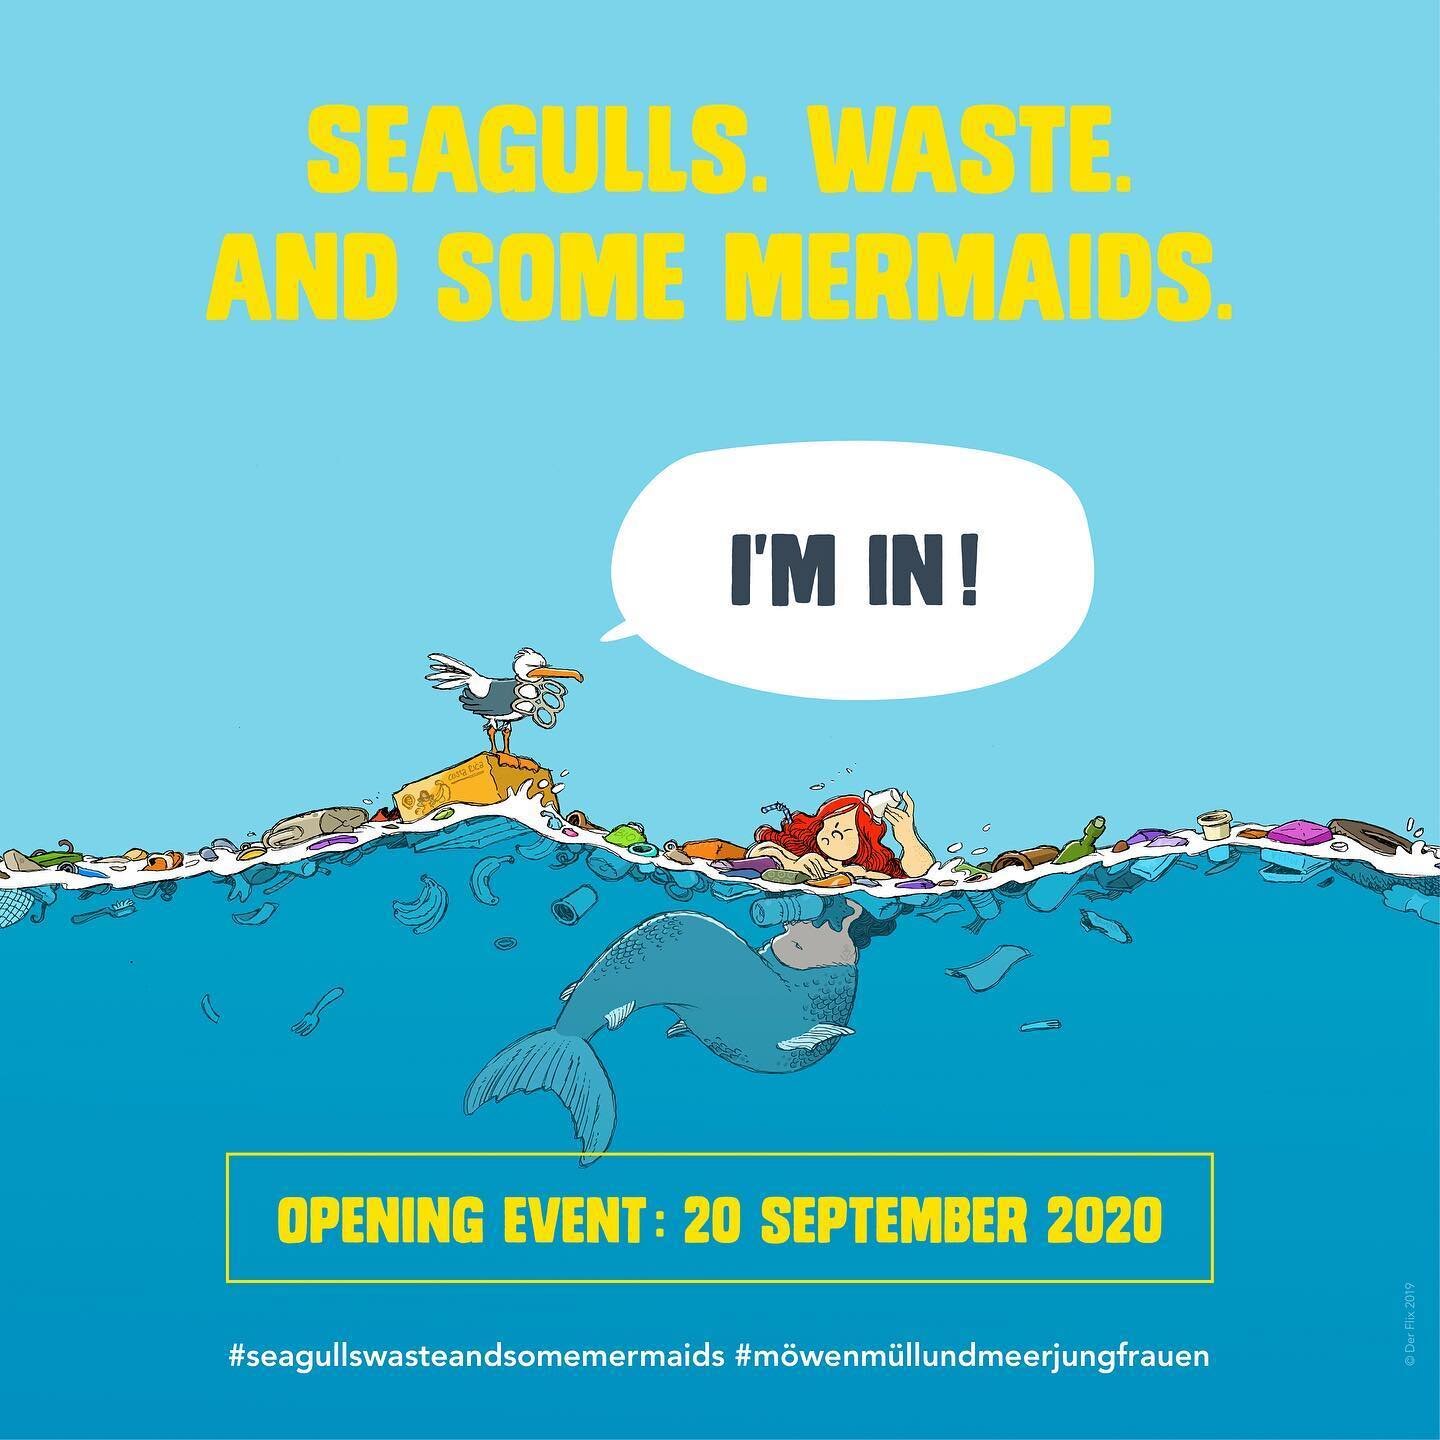 I&rsquo;m so excited that my art has been chosen to be displayed in this awesome event: Seagulls. Waste @allesallesgute And some mermaids, at this awesome location; the North Sea island of F&ouml;hr, in Germany. The exhibition brings awareness to the